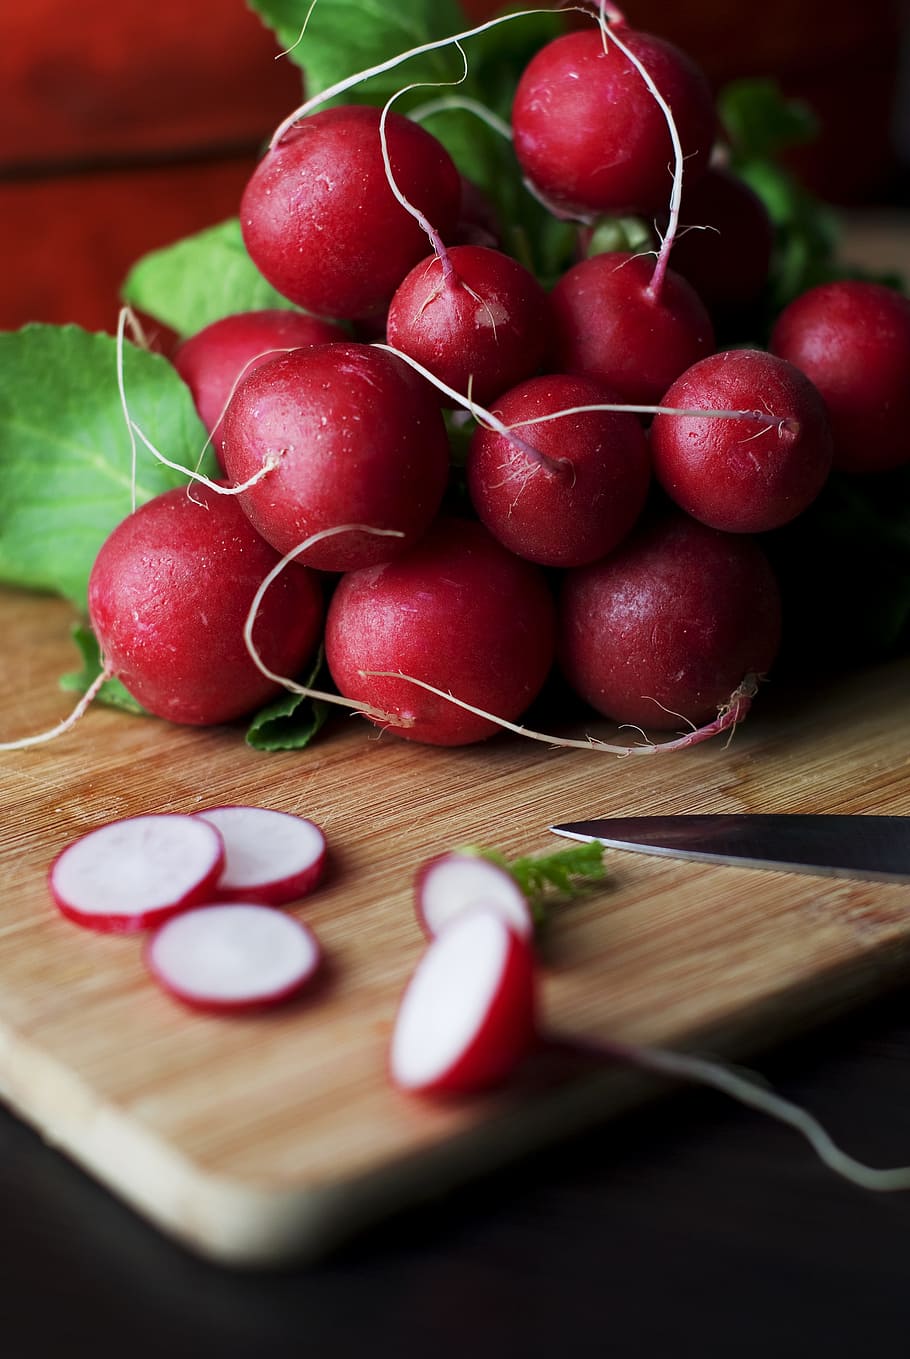 red, sliced, vegetables, table, radishes, vegatables, food, healthy, produce, organic